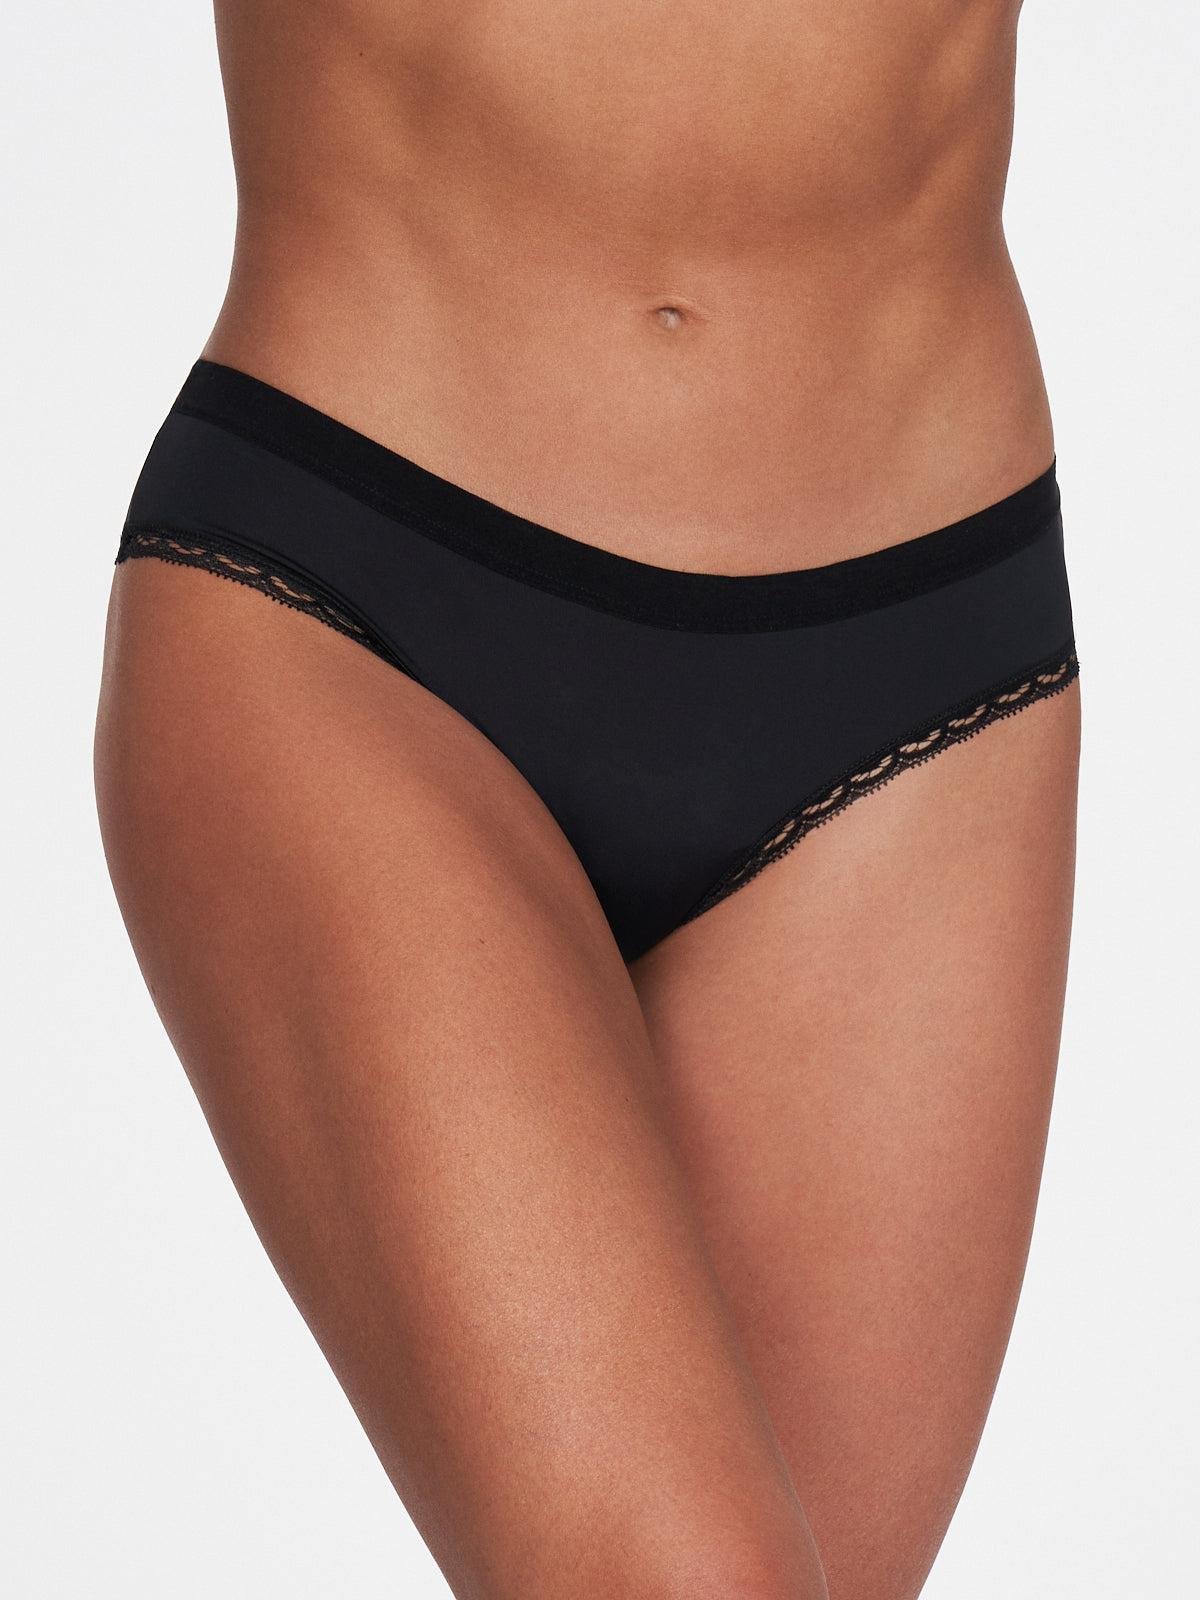 Kira Microfiber Cheeky in Black by FREDERICK'S OF HOLLYWOOD